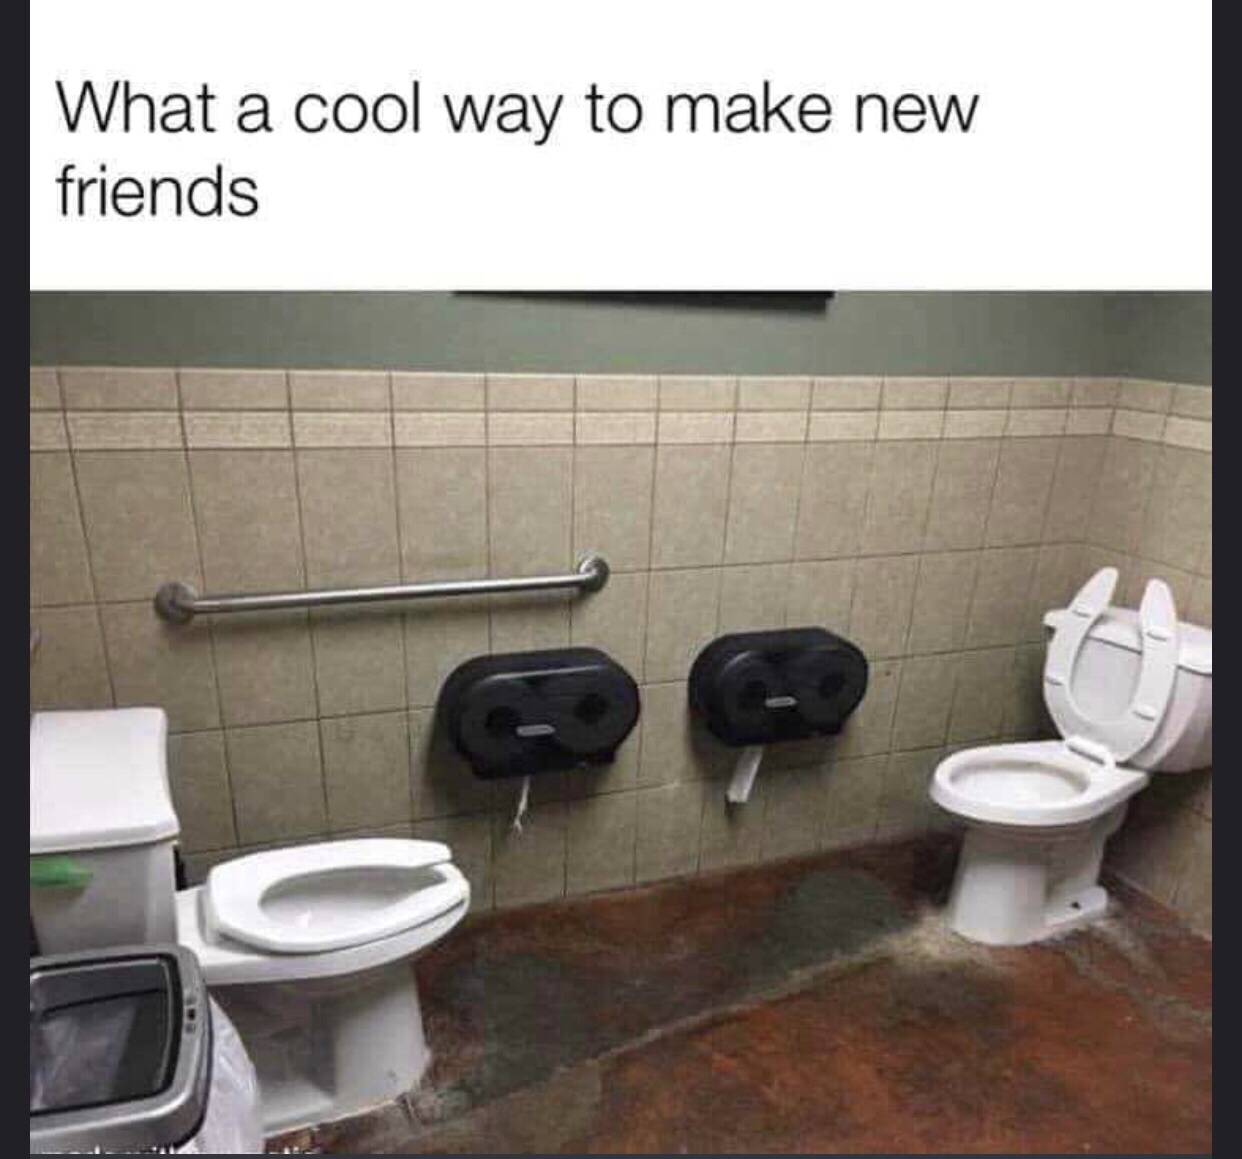 toilet meme - What a cool way to make new friends